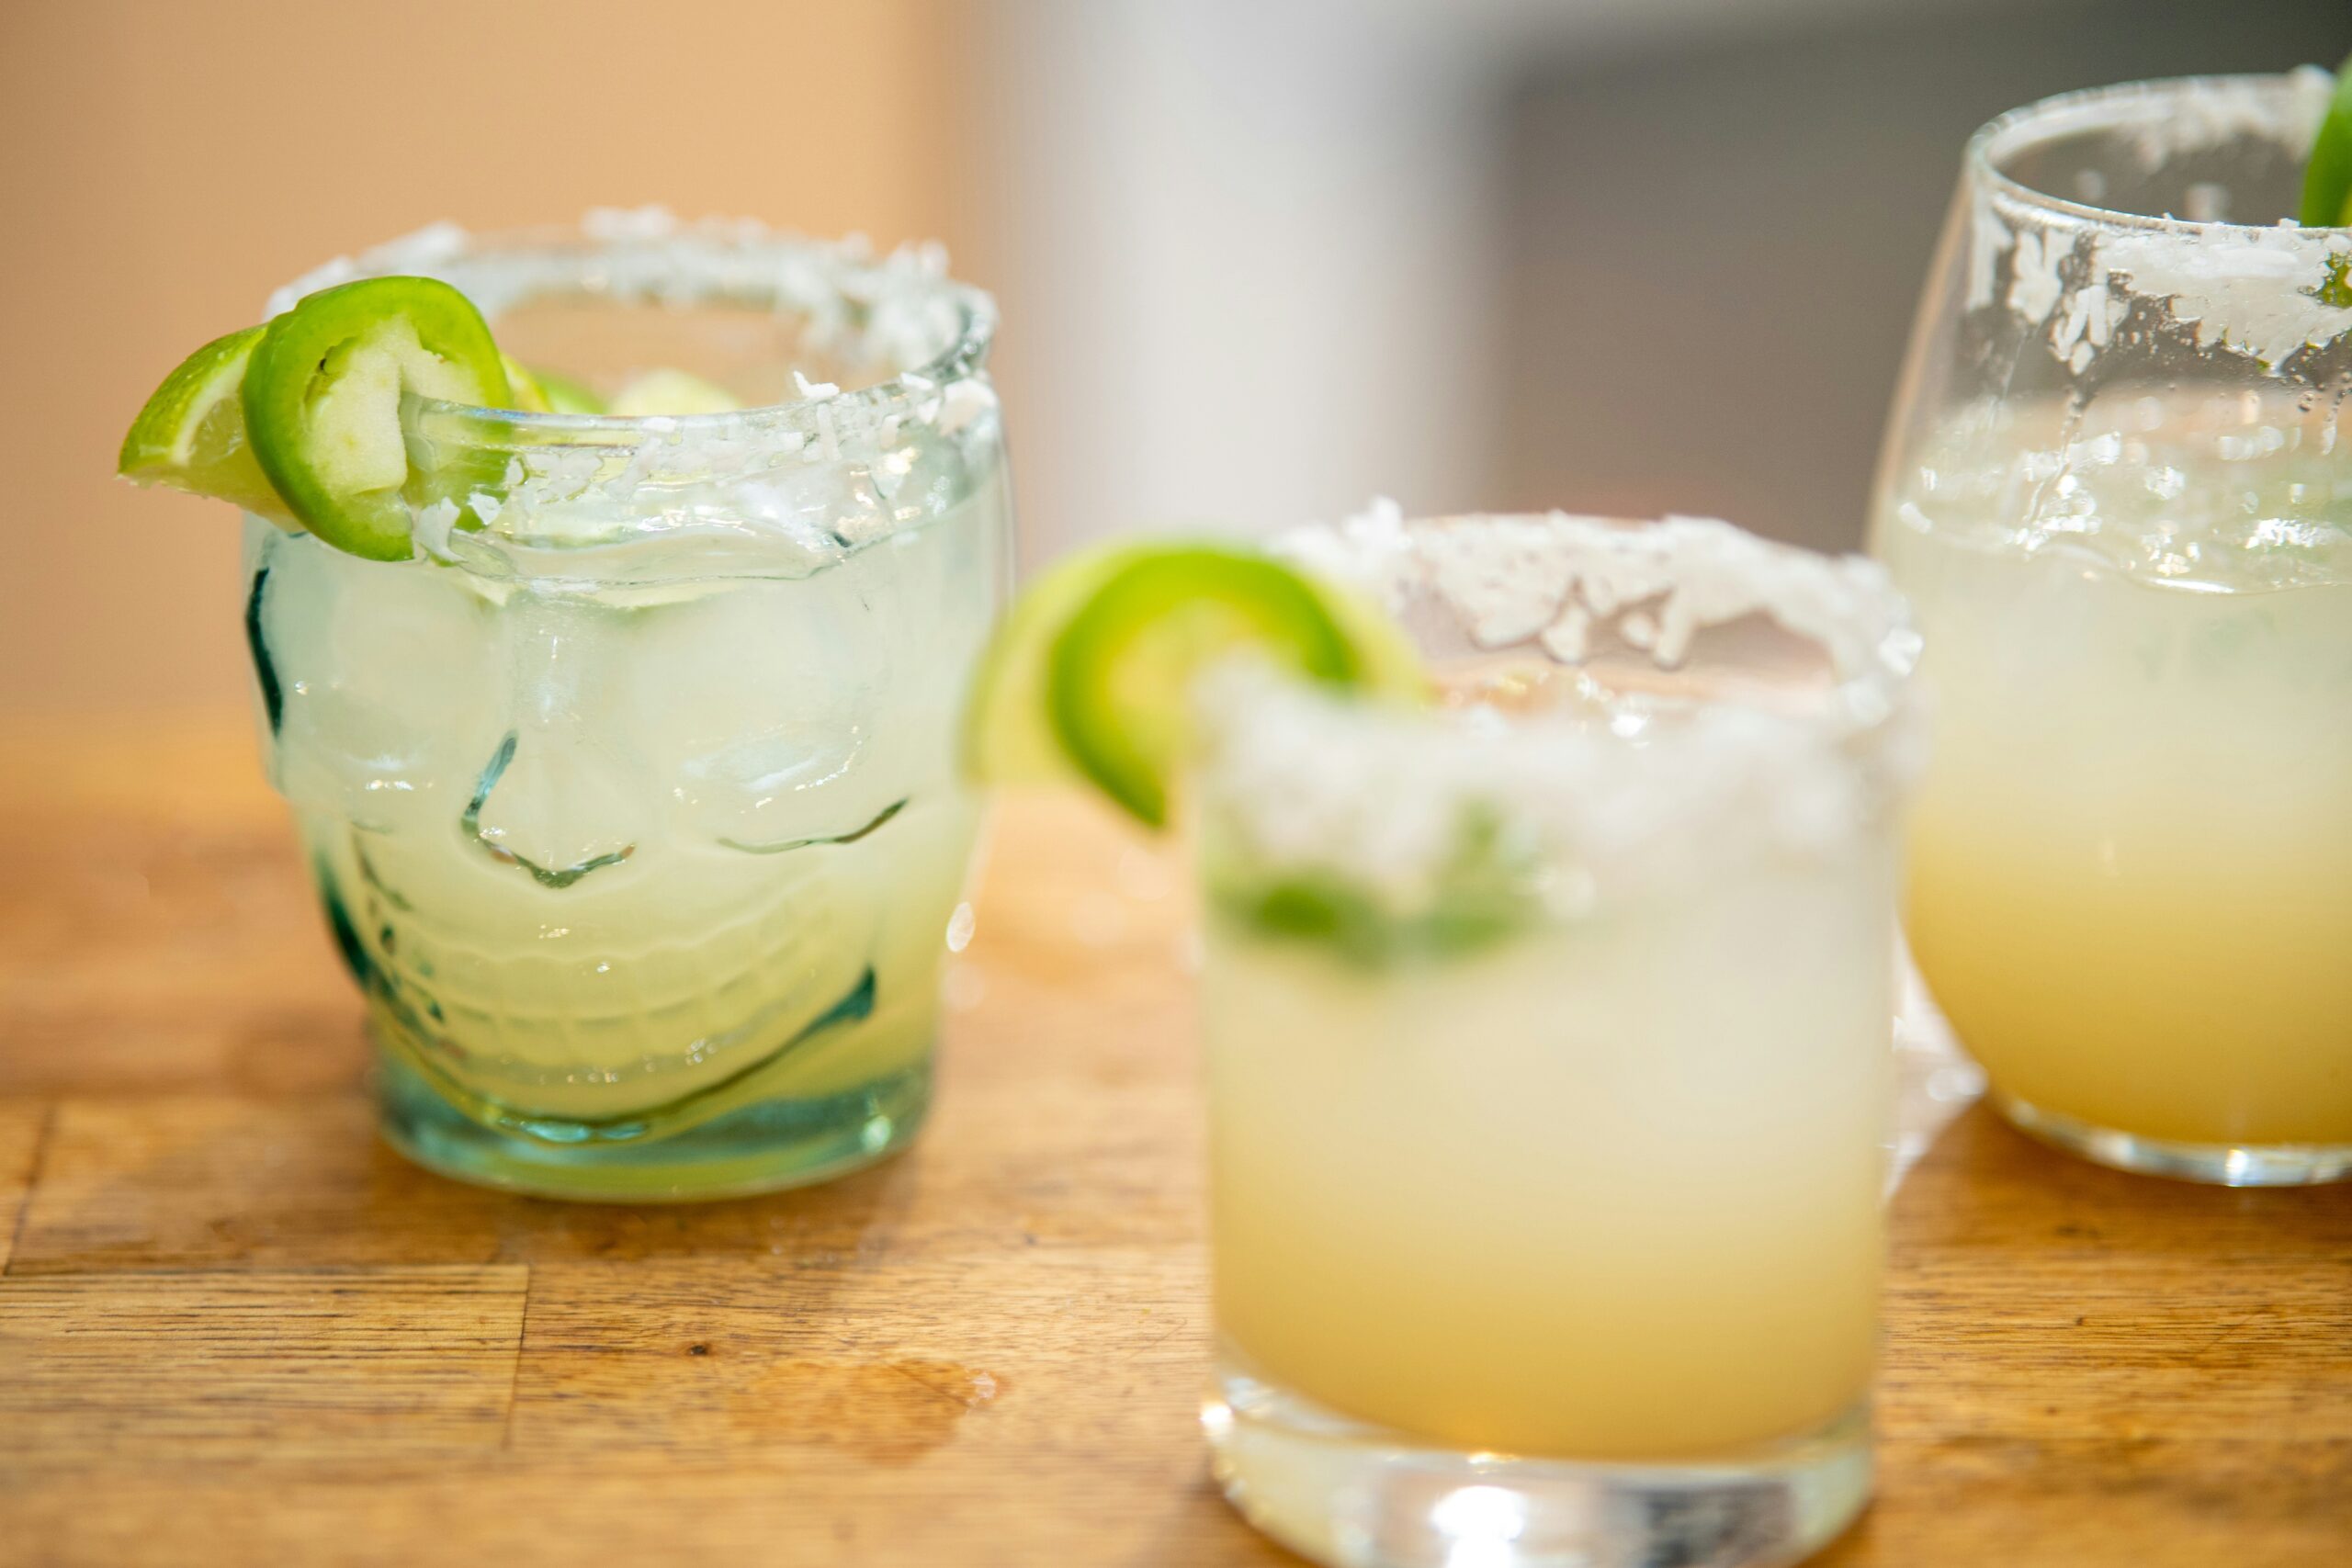 Check out these savory and simple tequila drinks with 2 ingredients. Pictured: Savory margaritas